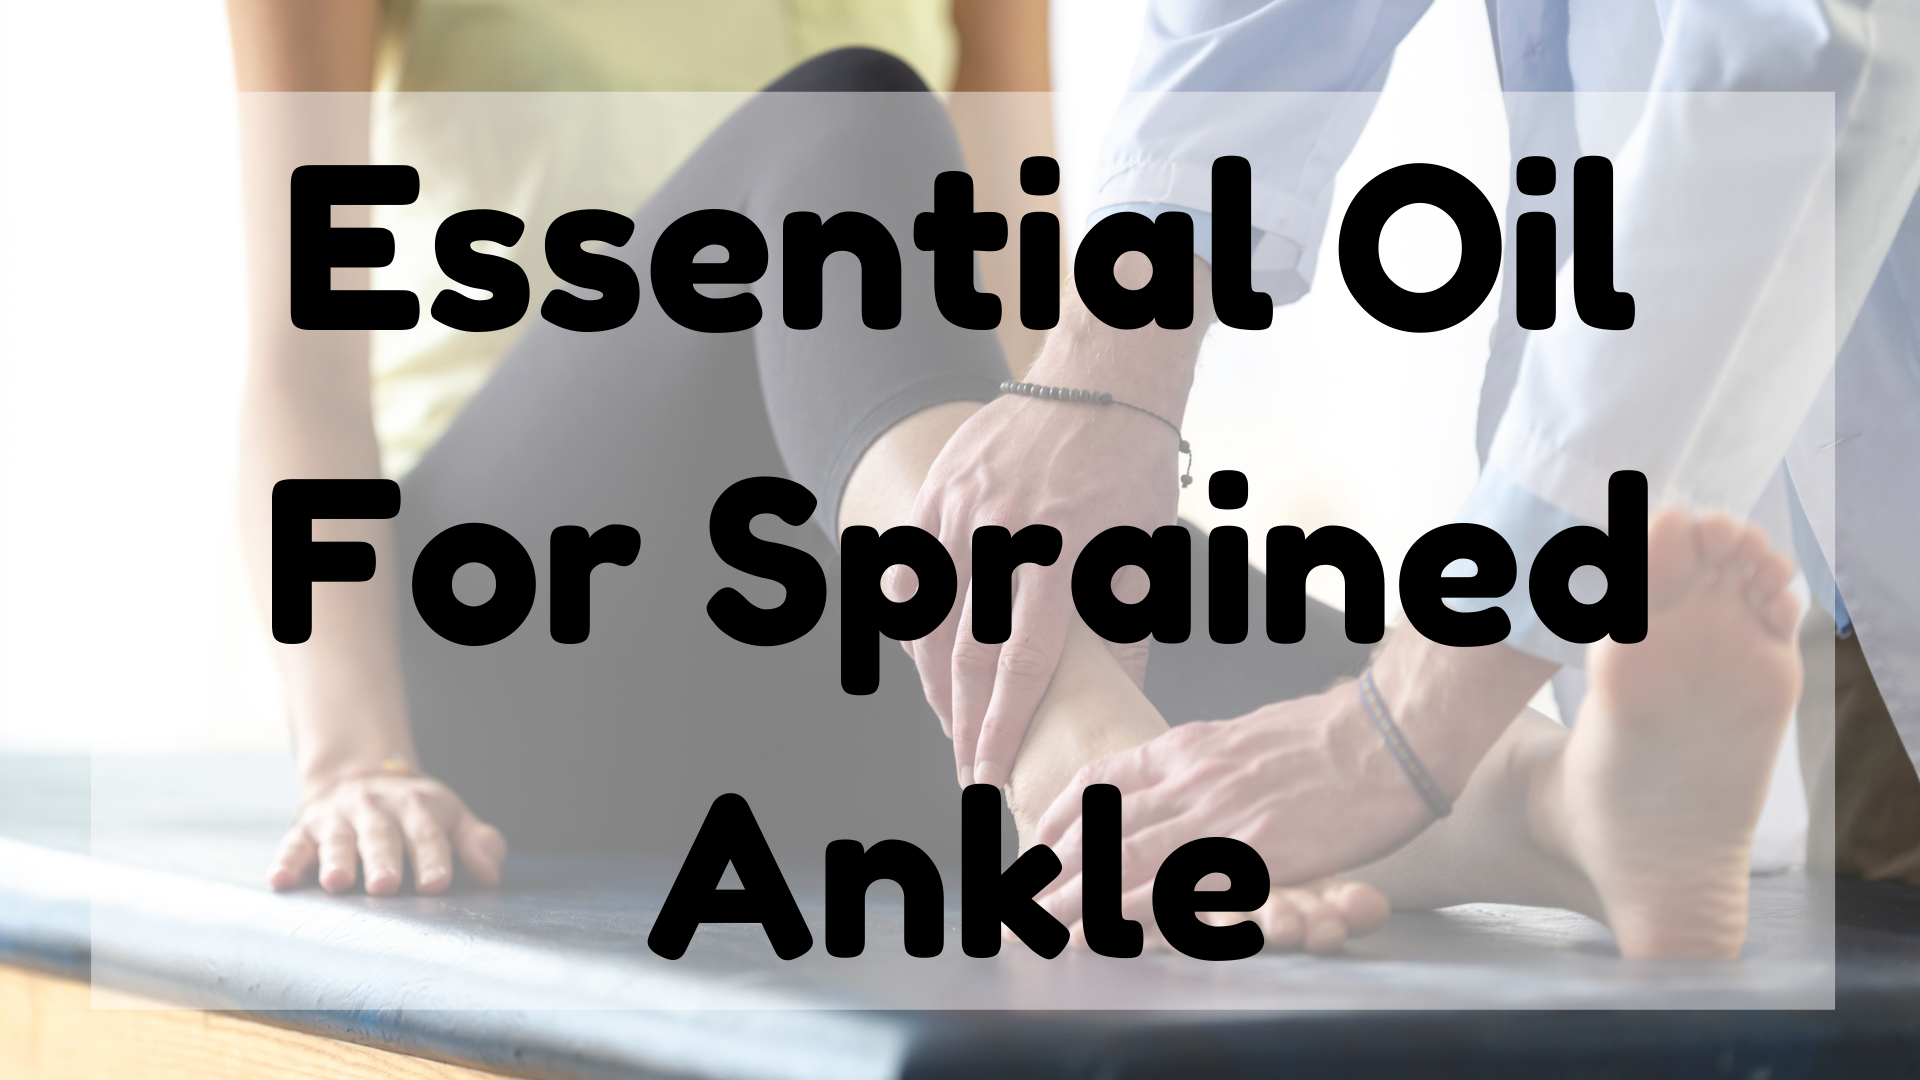 Essential Oil For Sprained Ankle